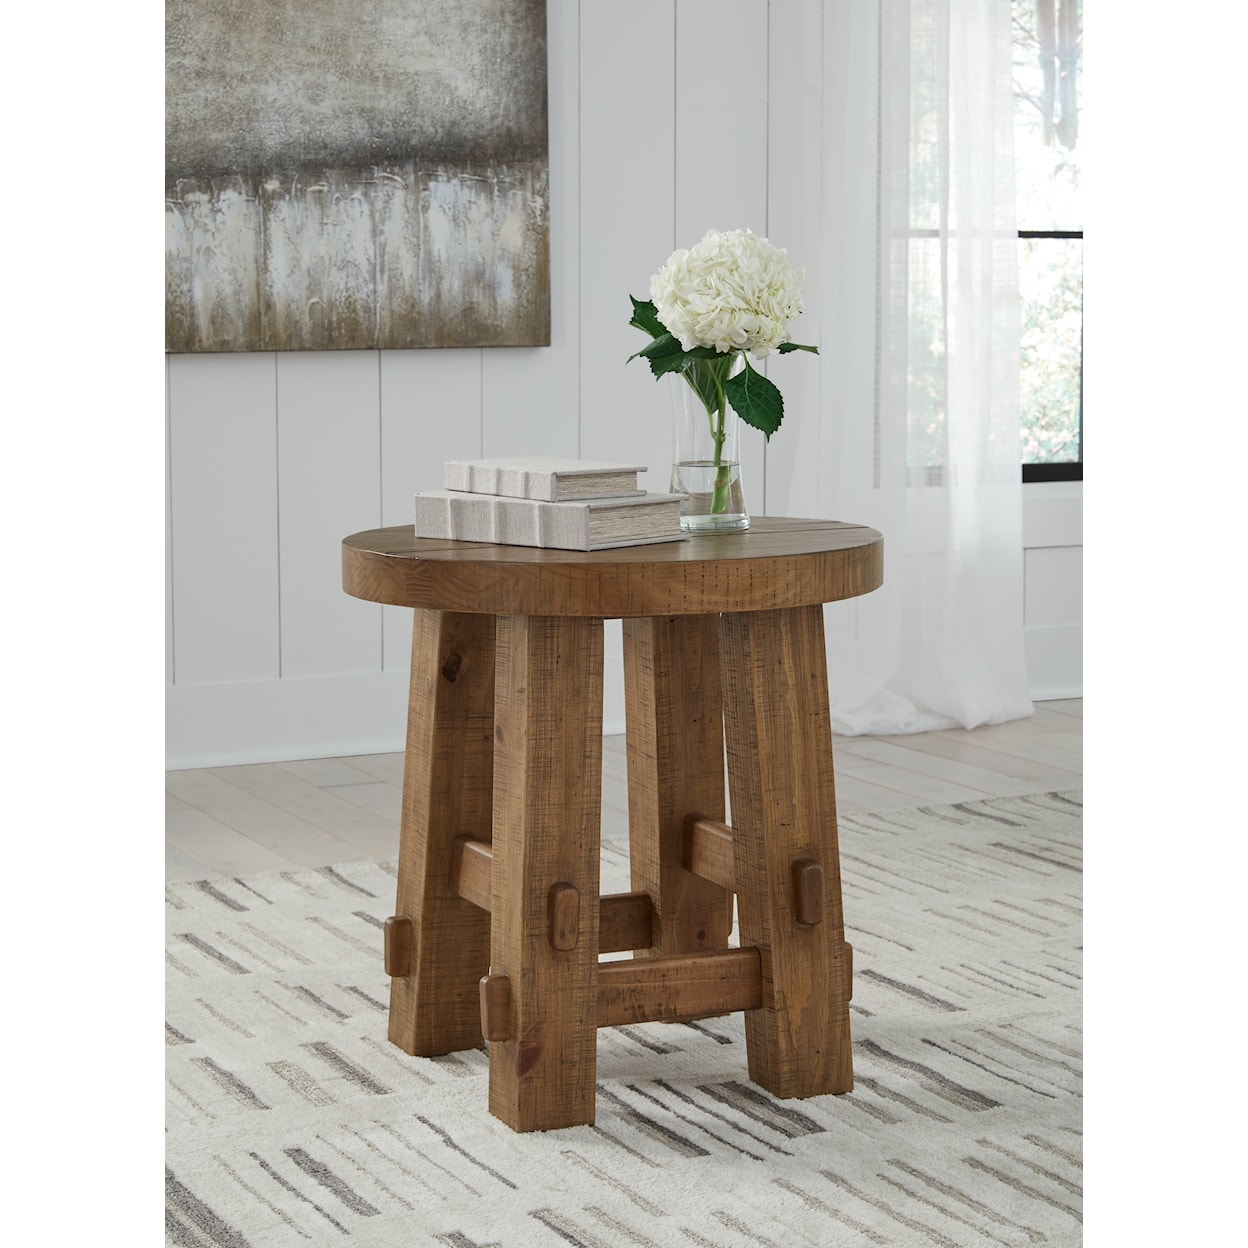 Signature Design by Ashley Mackifeld Round End Table